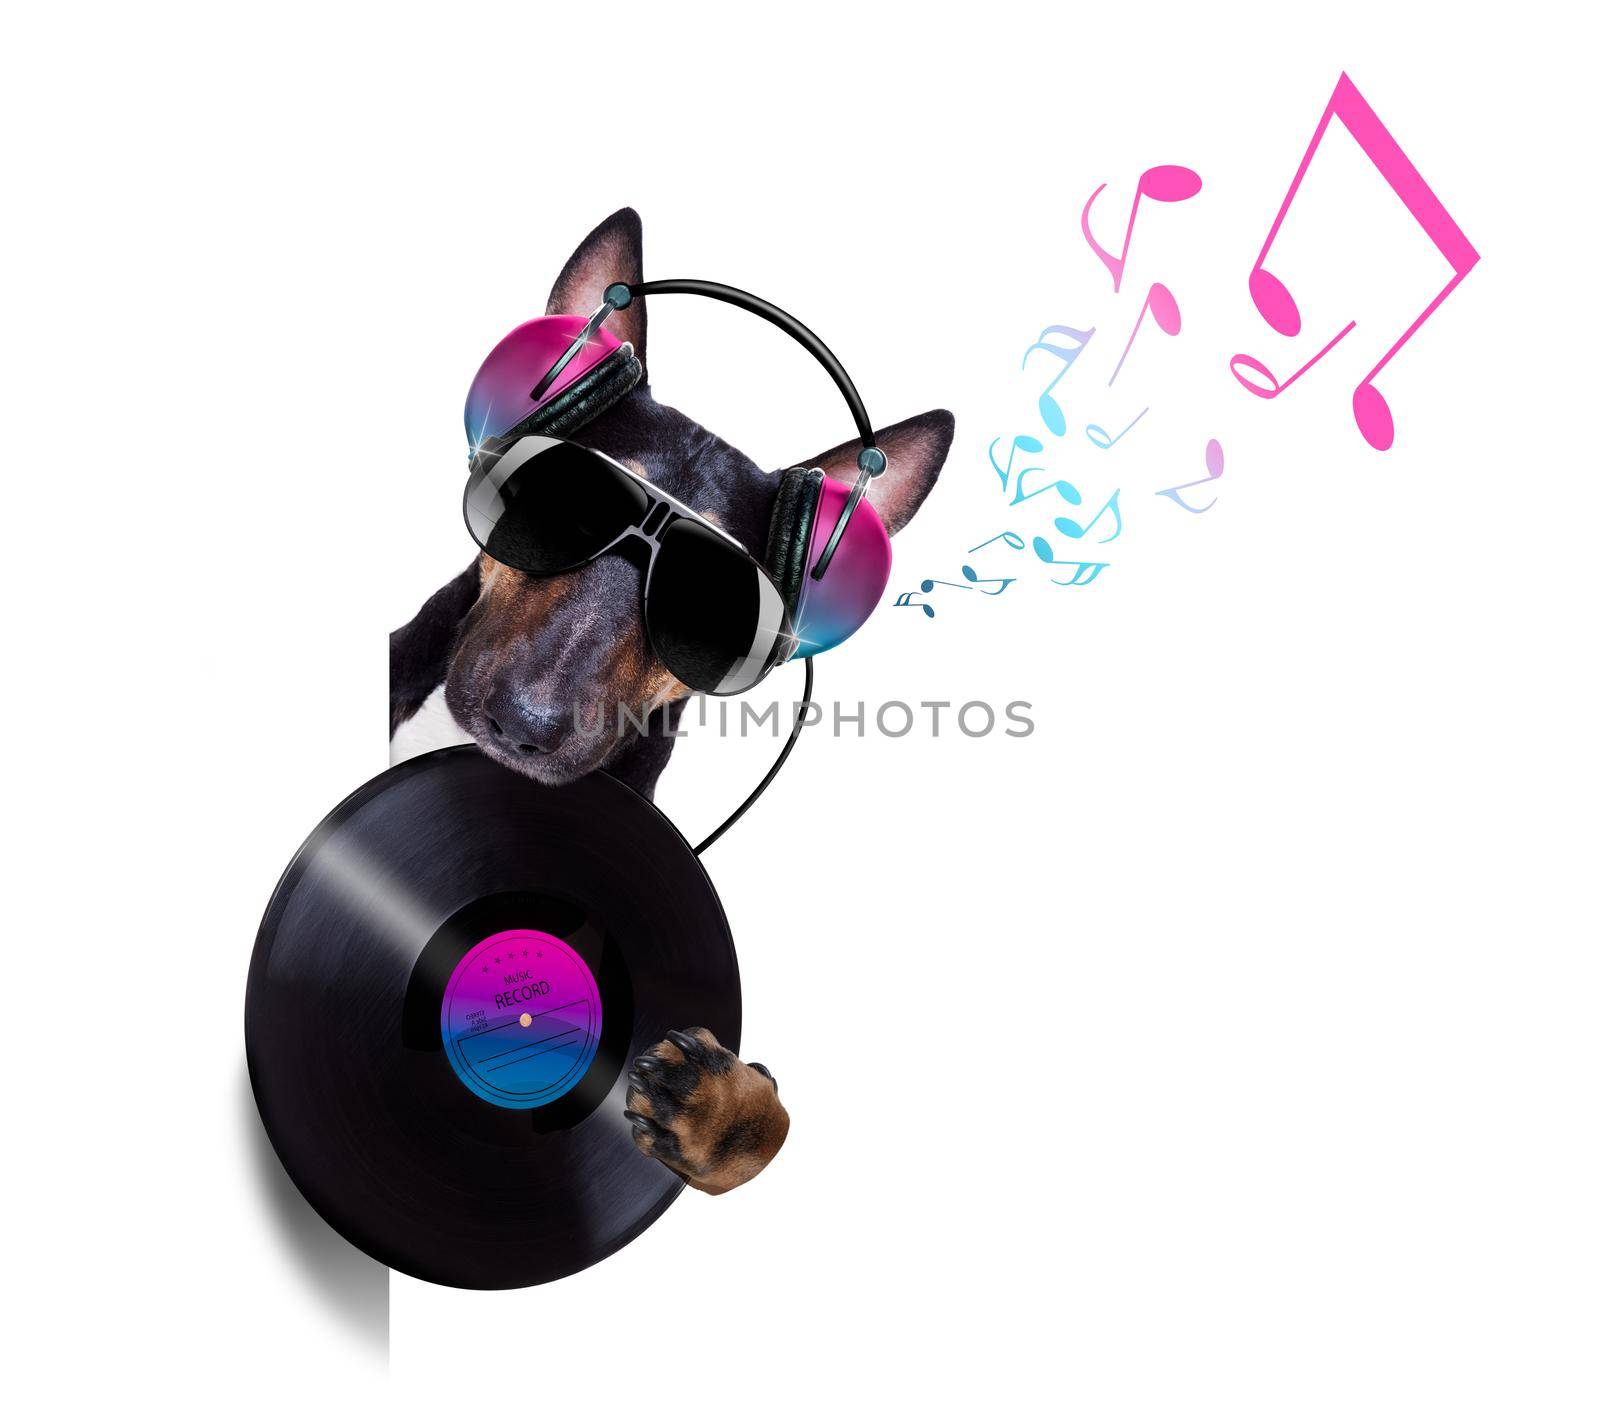 Dj bull terrier dog playing music in a club with disco ball , isolated on white background, with vinyl record behind banner or placard